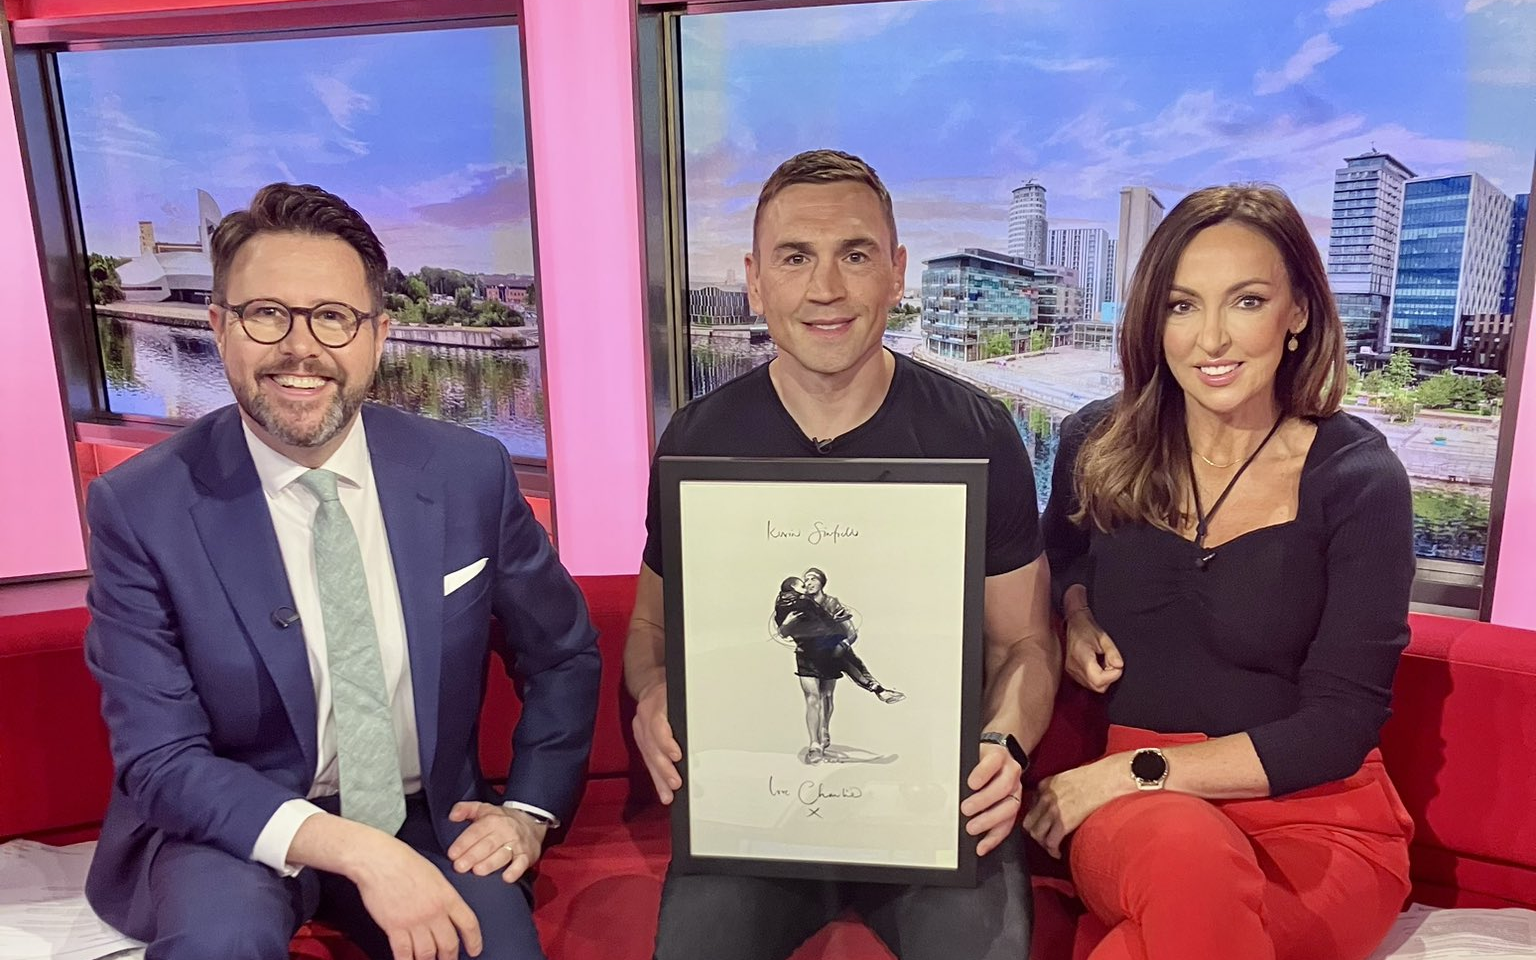 Kevin Sinfield given artwork of him carrying Rob Burrow over the finish line Leeds Marathon